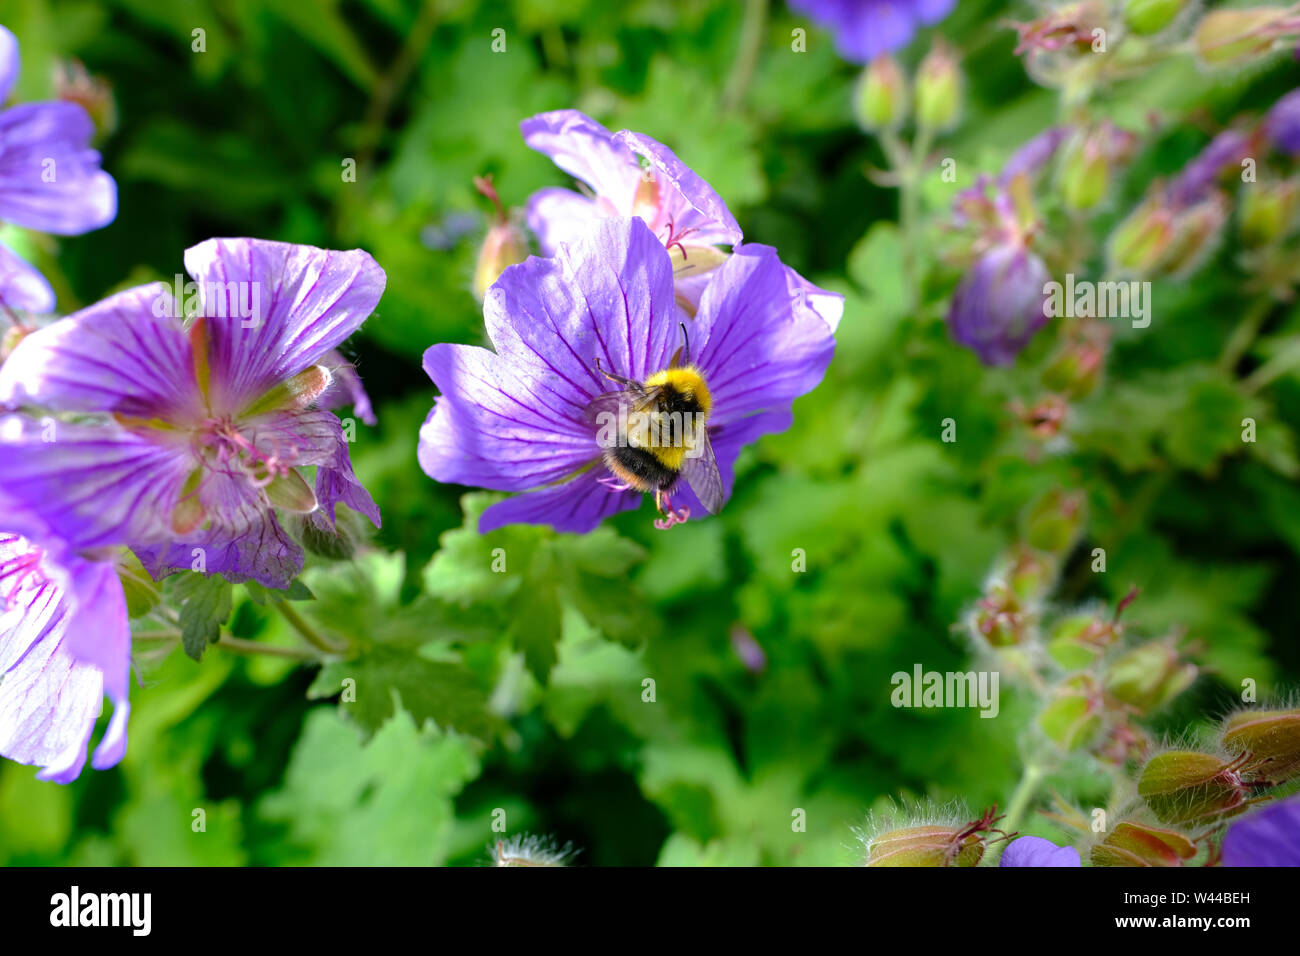 Geranium flowers being pollinated by a bumble bee in an English cottage garden herbaceous border Stock Photo